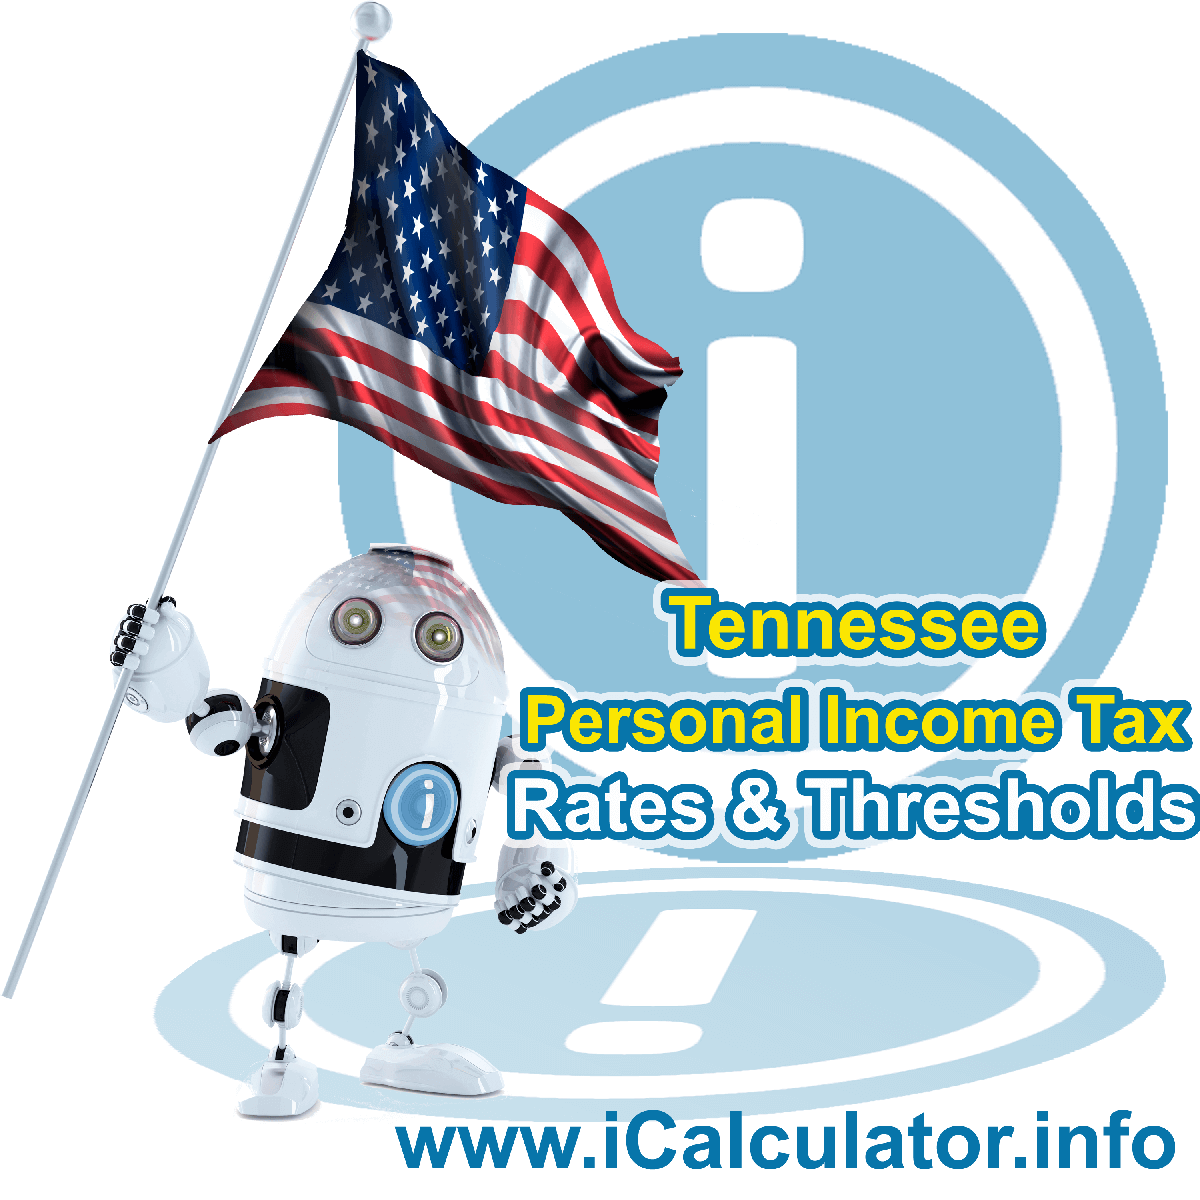 Tennessee State Tax Tables 2013. This image displays details of the Tennessee State Tax Tables for the 2013 tax return year which is provided in support of the 2013 US Tax Calculator